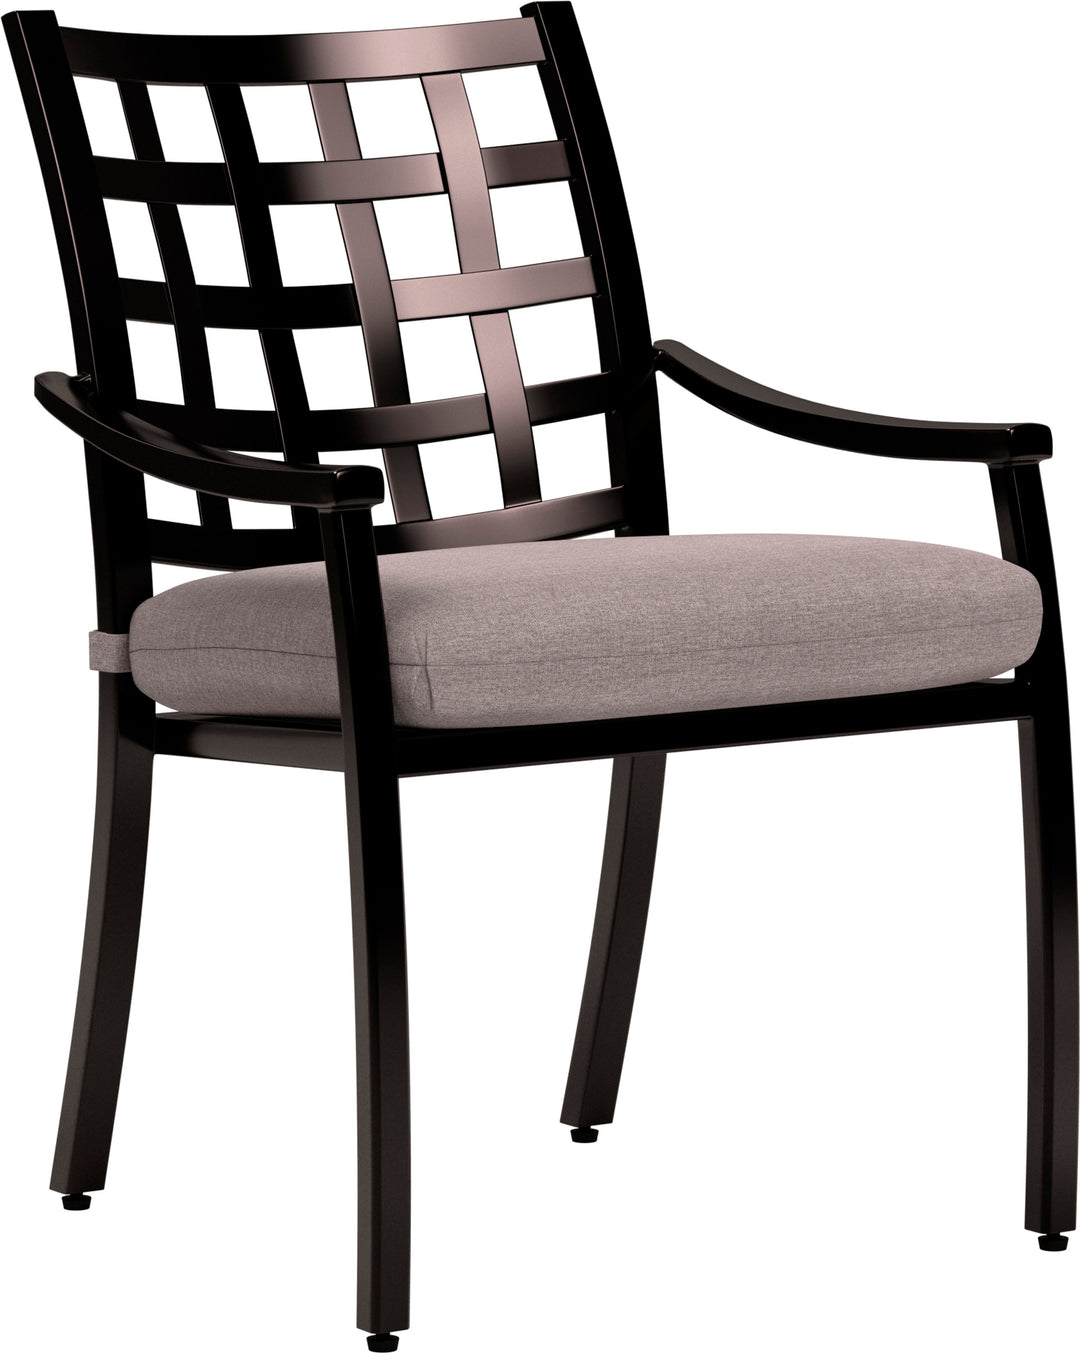 Yardbird® - Lily Outdoor Dining Arm Chair - Shale_1